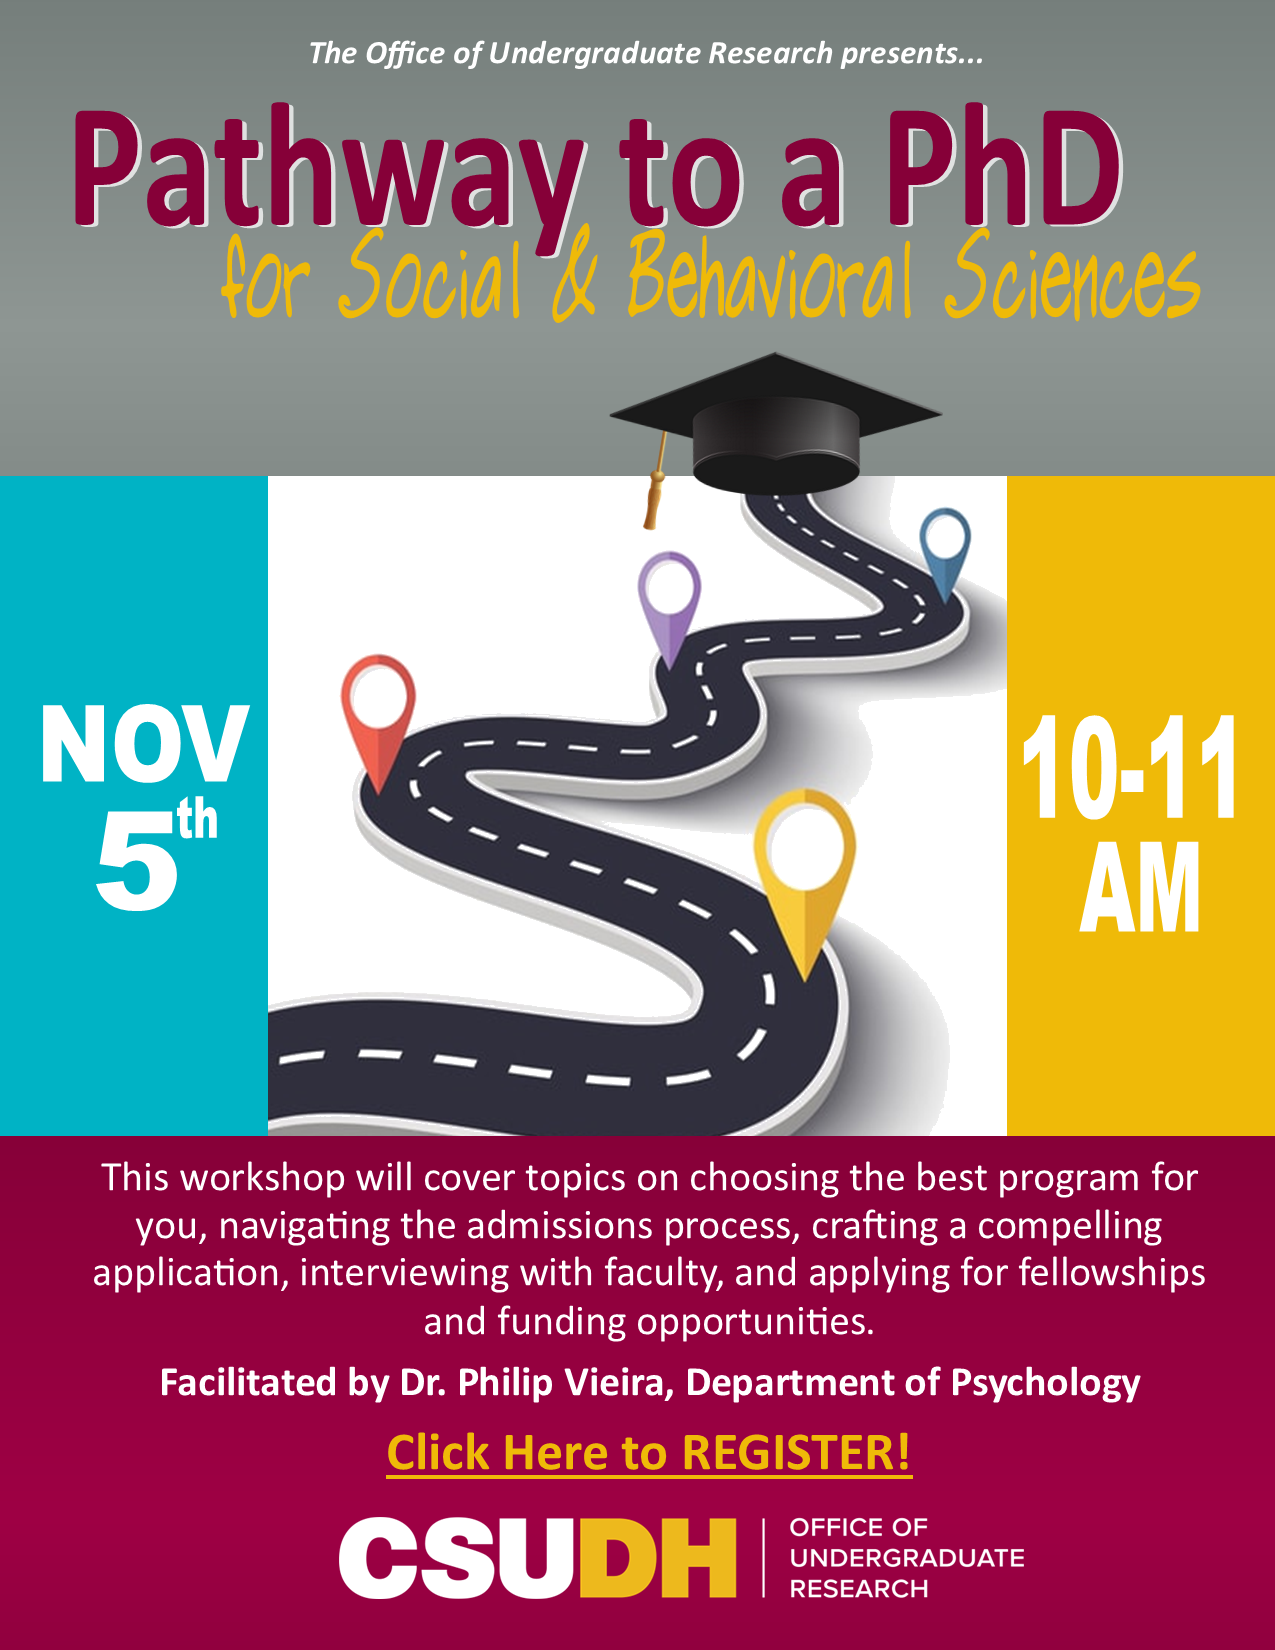 Pathway to a PhD for Social & Behavioral Sciences 11-5-21